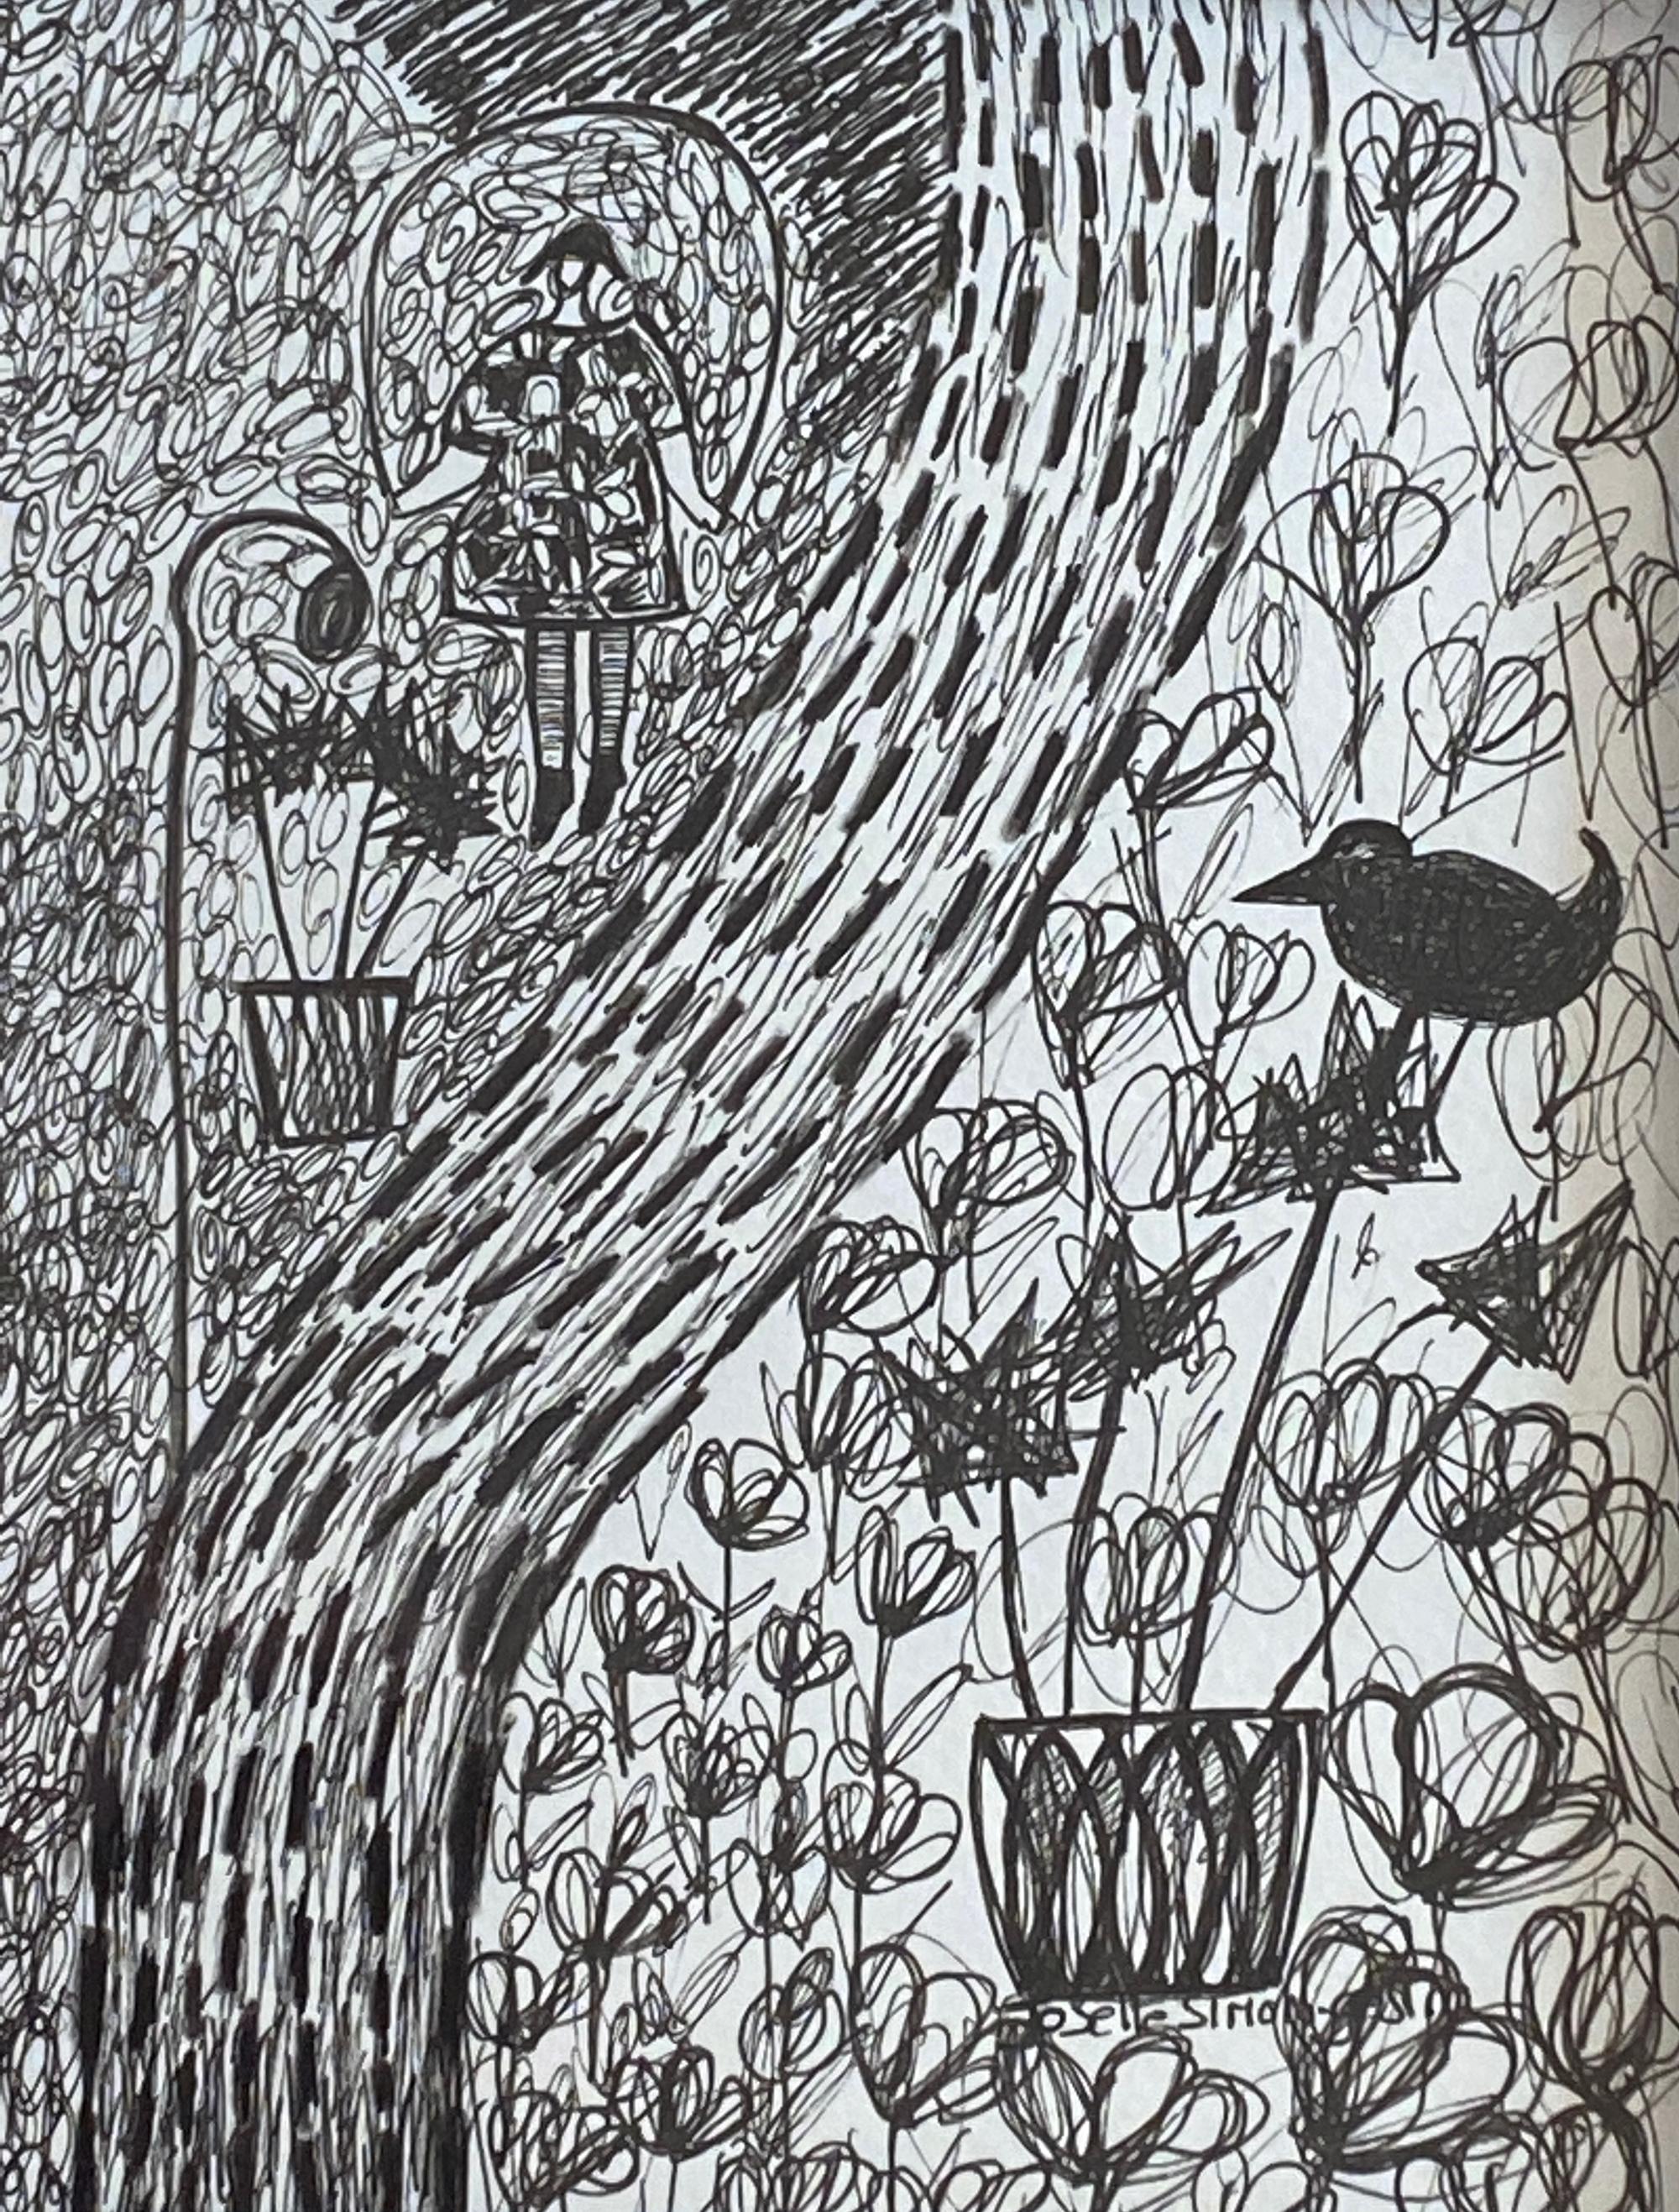 In this 9 x 12 framed ink drawing by Josette Simon-Gestin, two women are seen wandering in an imaginary garden with a bird and flowers surrounding them.  A younger girl jumps rope next to the garden pathway that provides a vertical intersection of